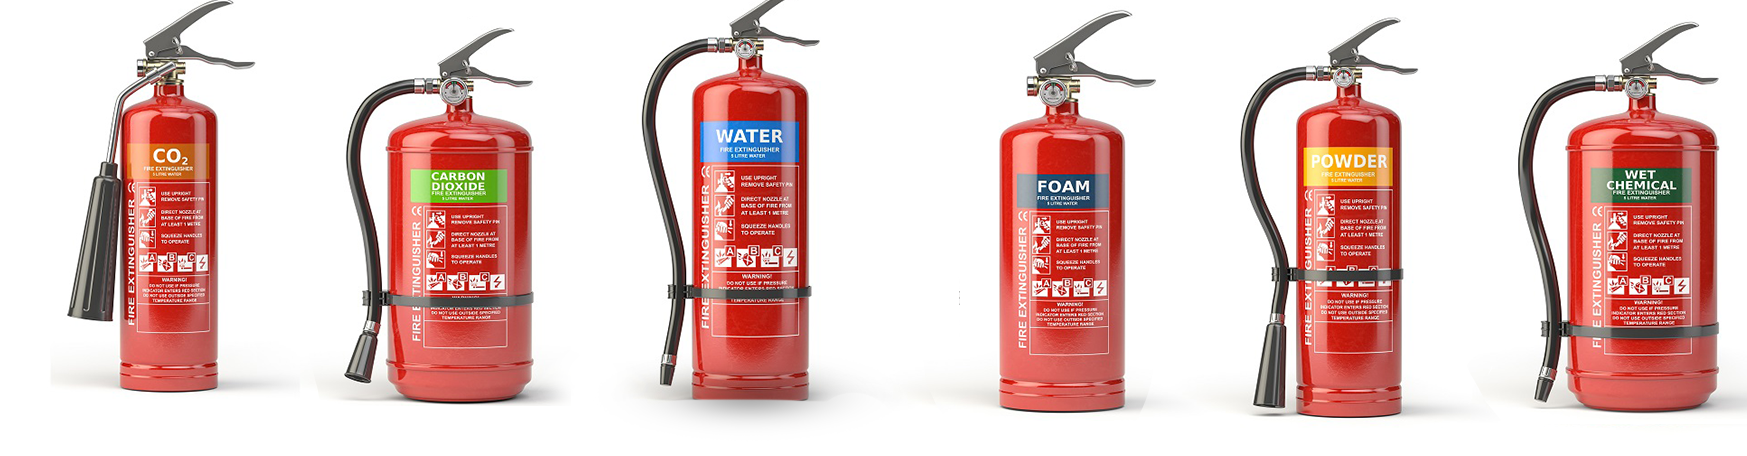 Different types of fire suppression equipment